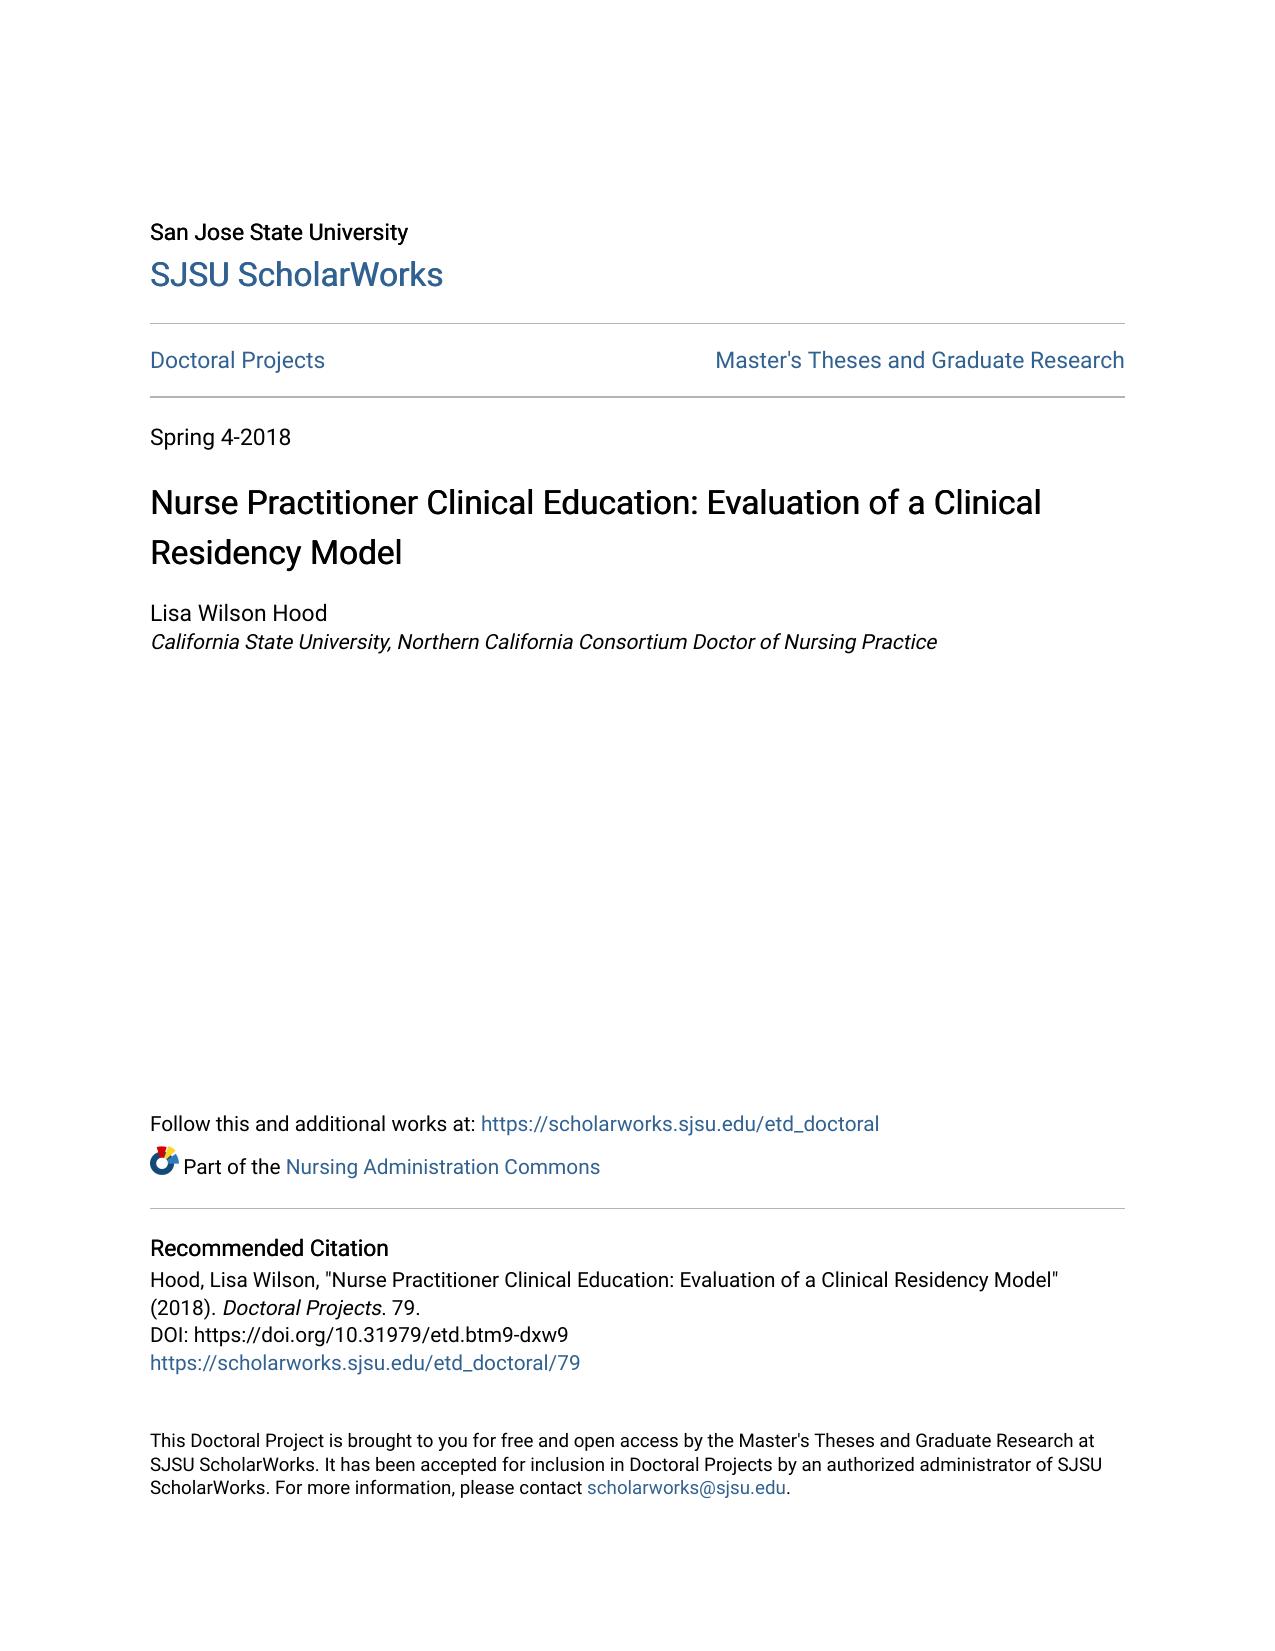 Nurse Practitioner Clinical Education: Evaluation of a Clinical Residency Model